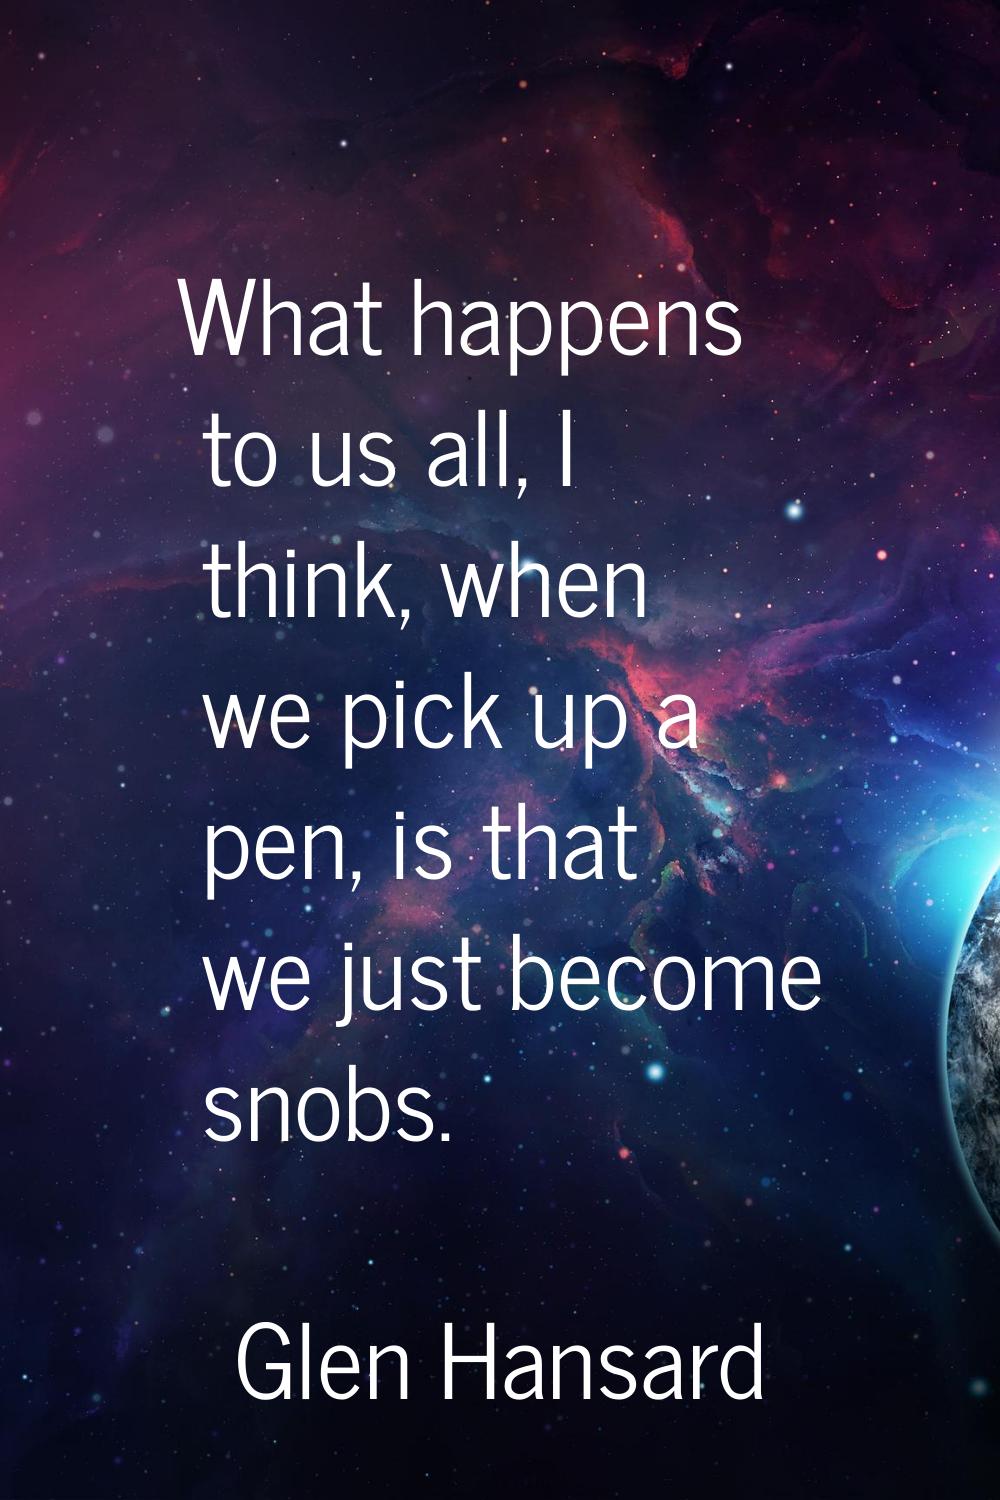 What happens to us all, I think, when we pick up a pen, is that we just become snobs.